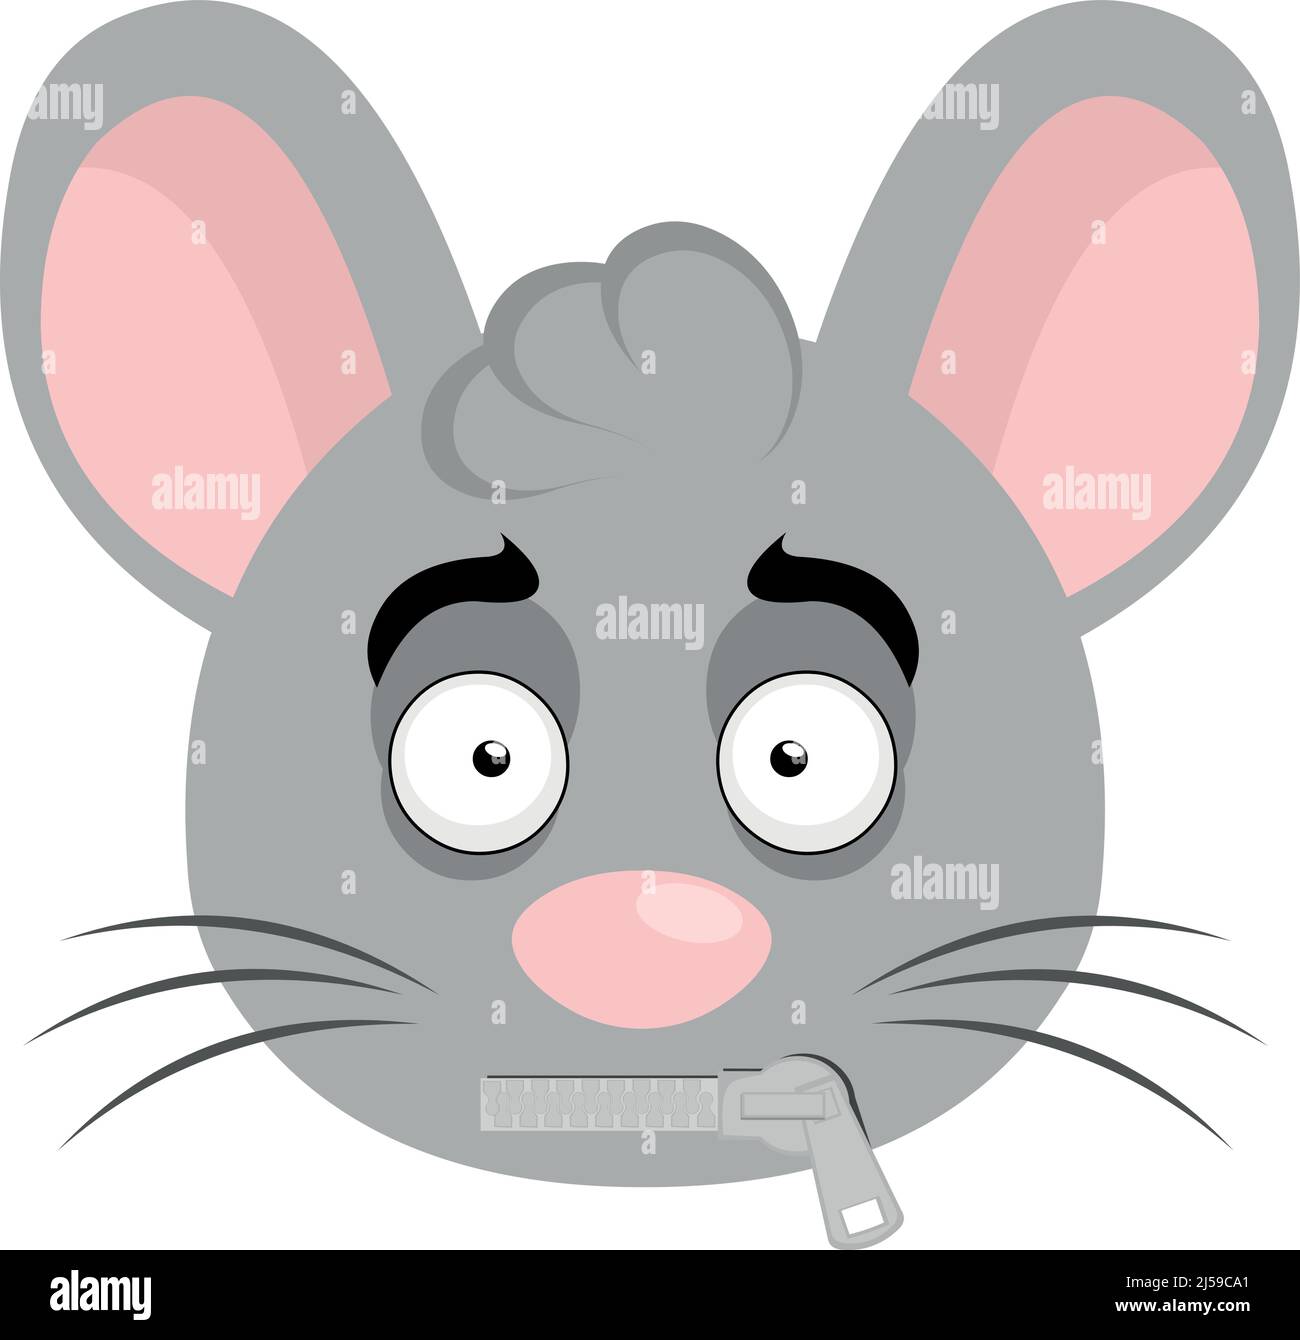 Vector illustration of a cartoon mouse face with a zipper in its mouth Stock Vector